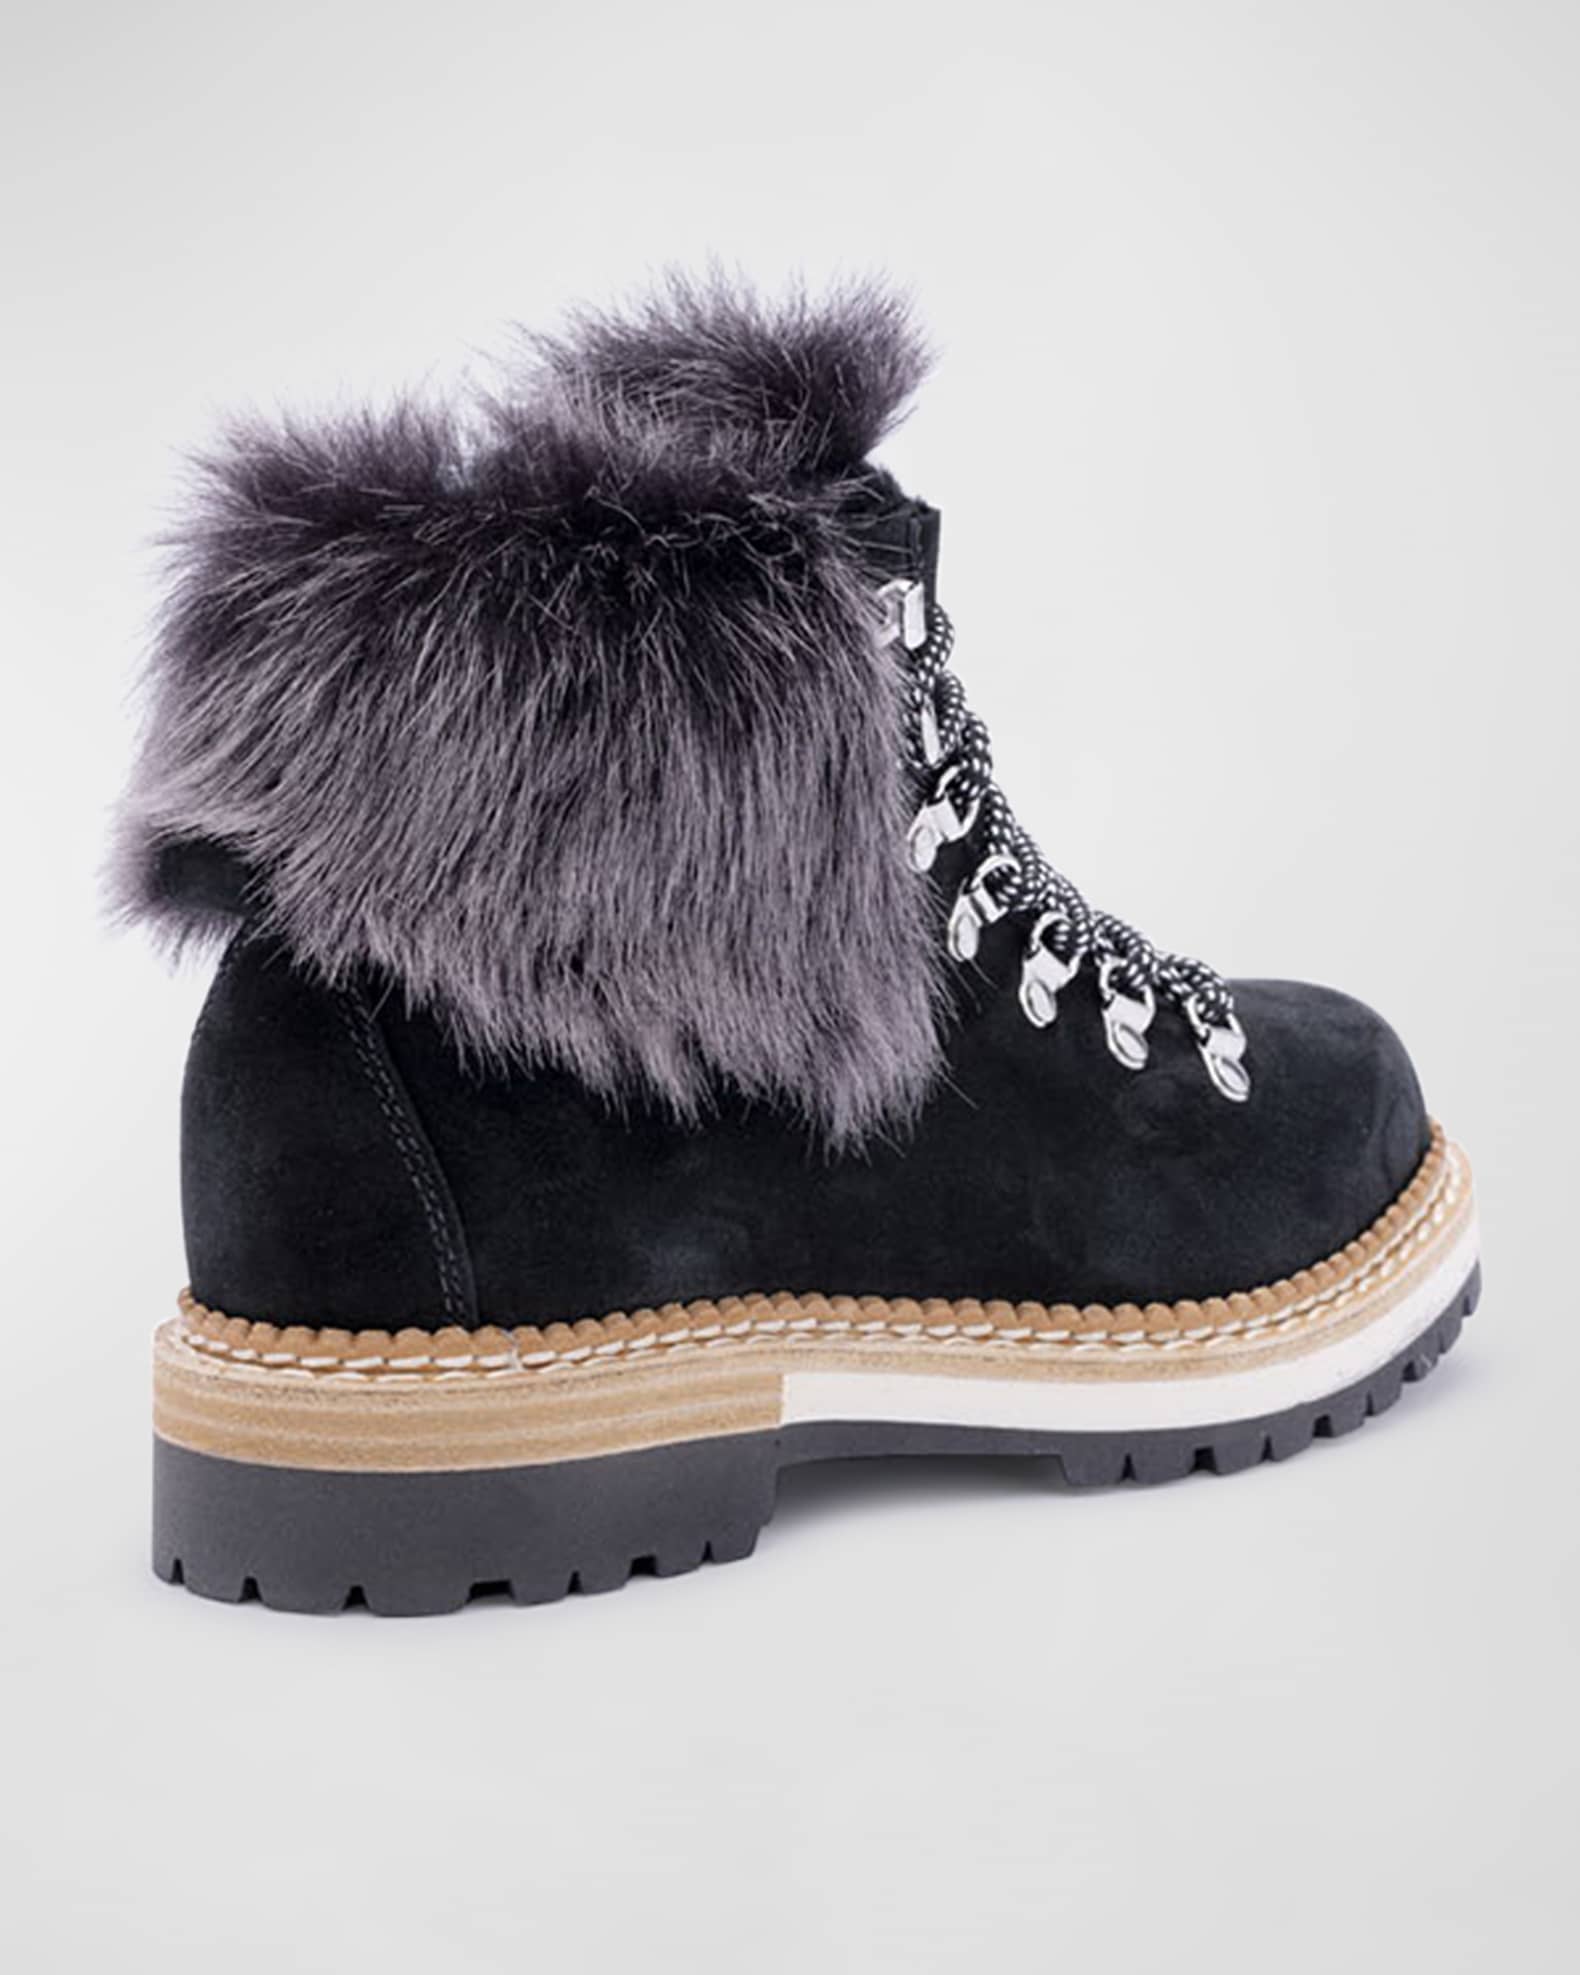 Montelliana 1965 Suede Shearling-Lined Hiking Boots | Neiman Marcus